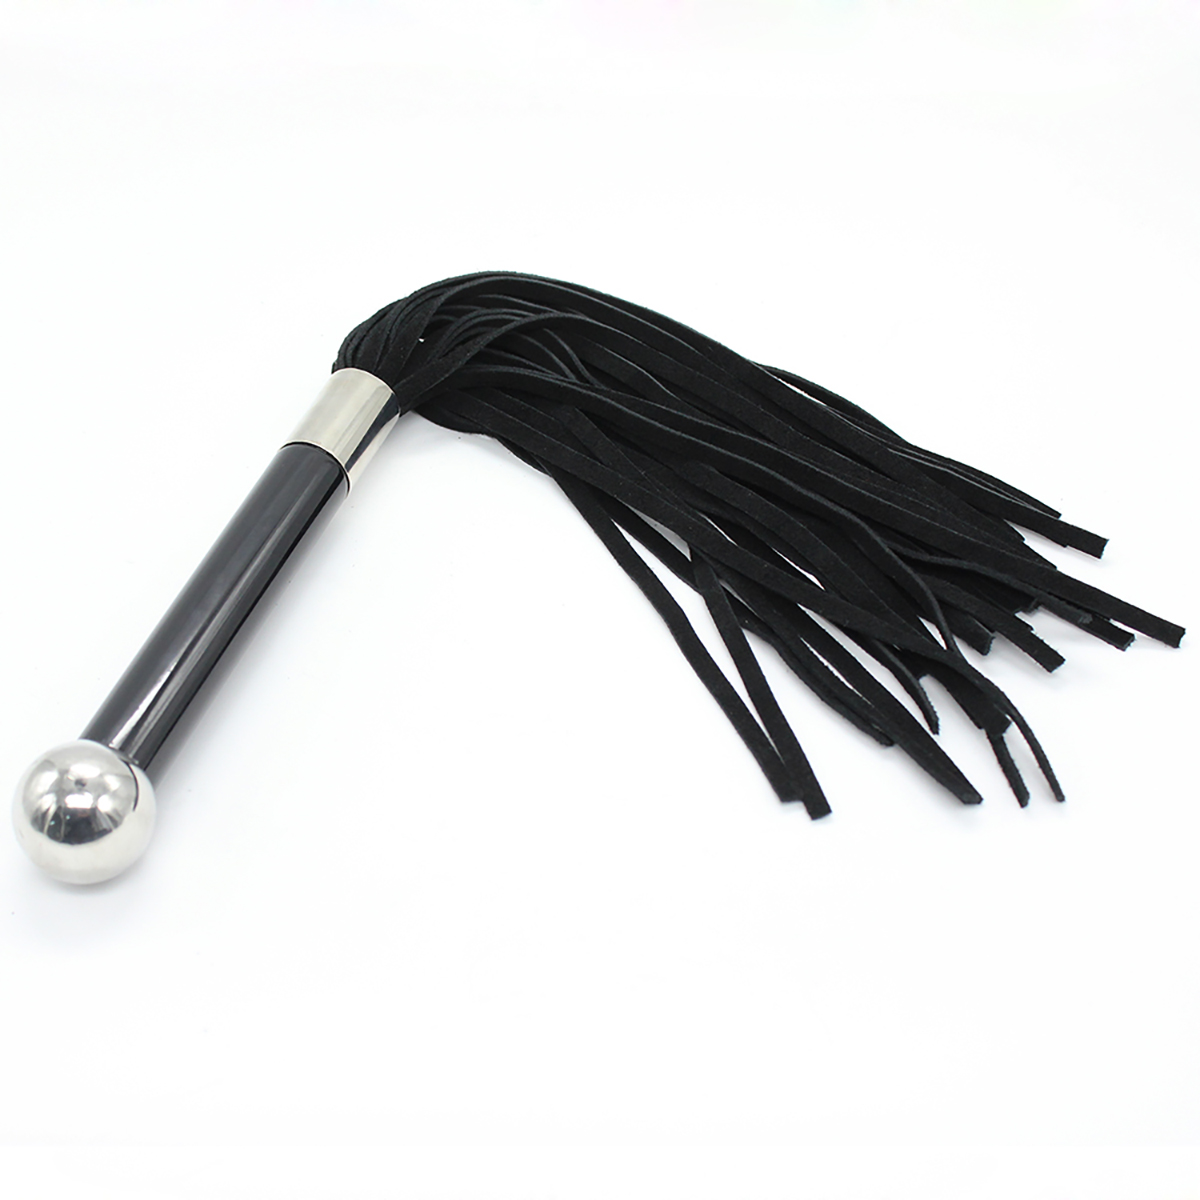 Black-Flogger-With-Acrylic-Handle-OPR-321105-1